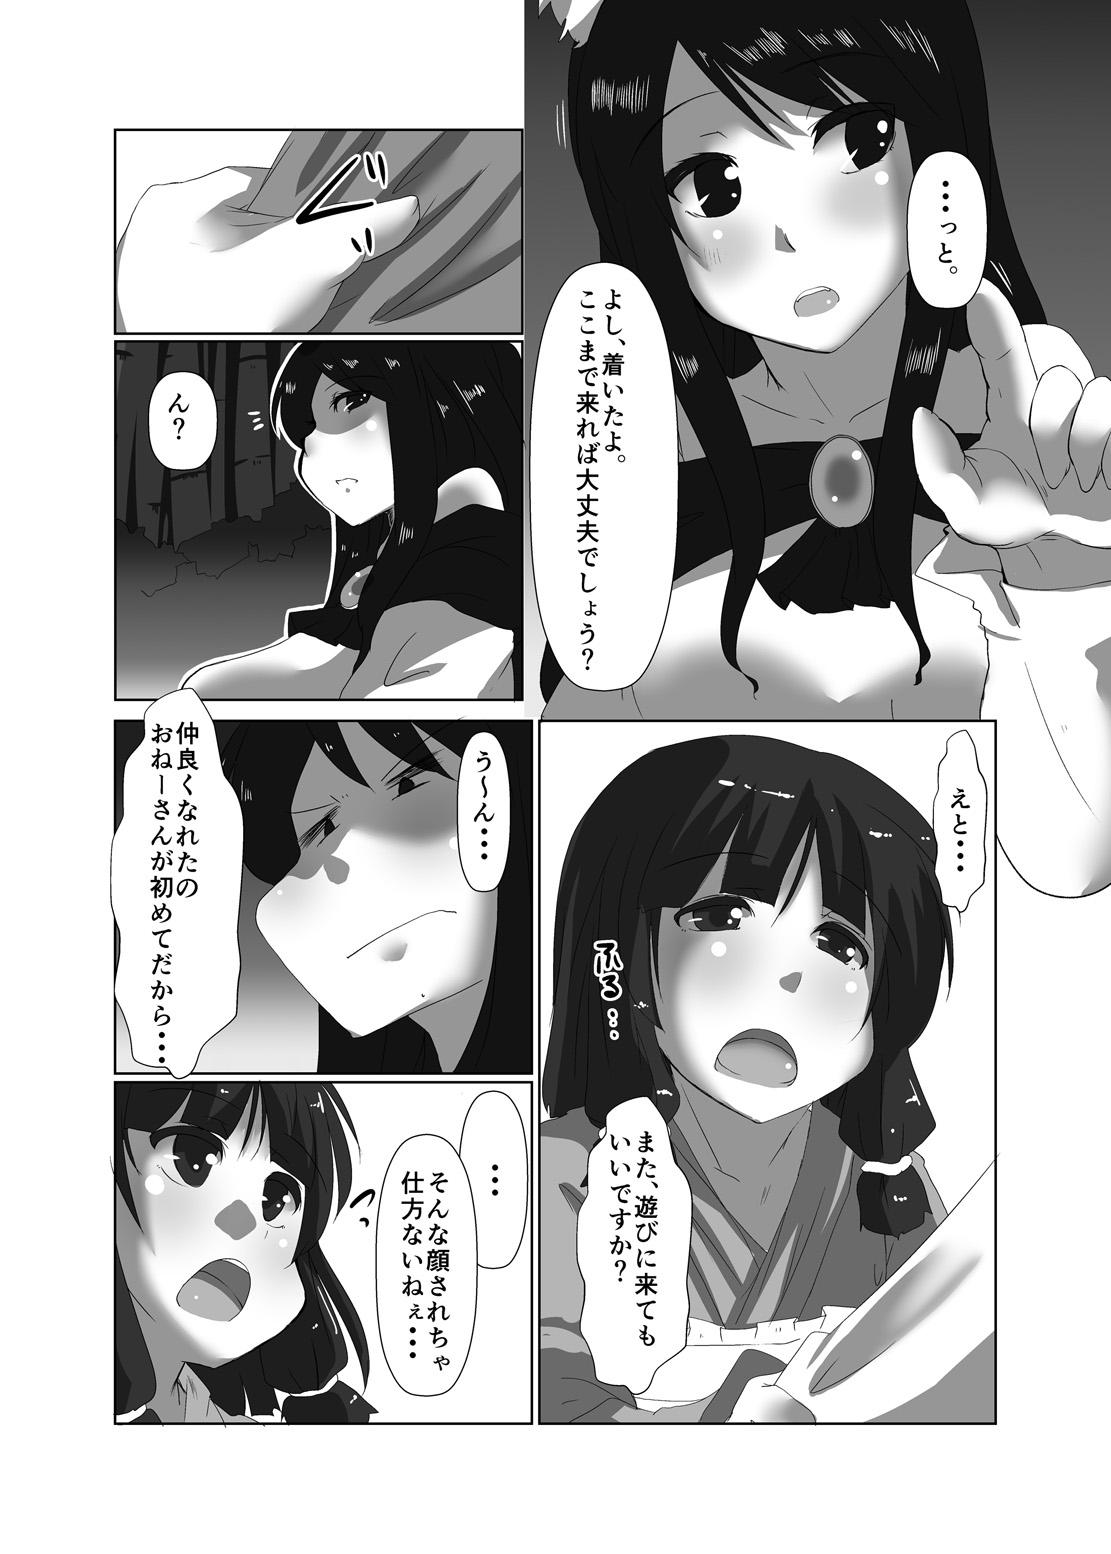 Tall ELonely Wolf no Onee-san - Touhou project Asian - Page 10